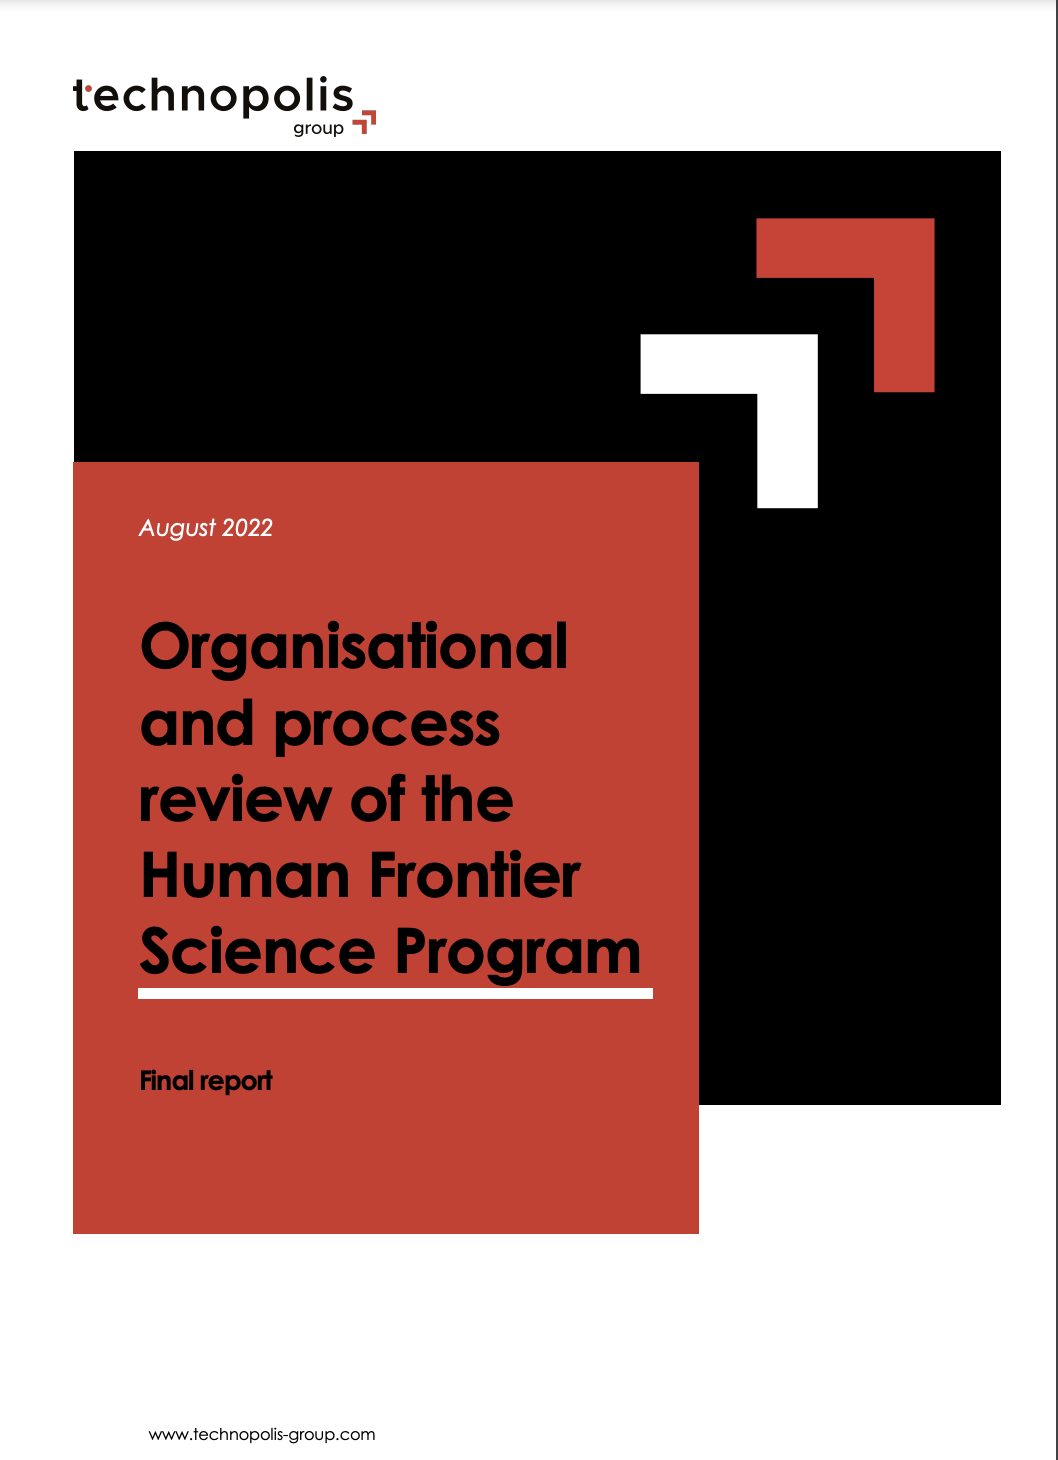 Organisational and process review of the Human Frontier Science Program